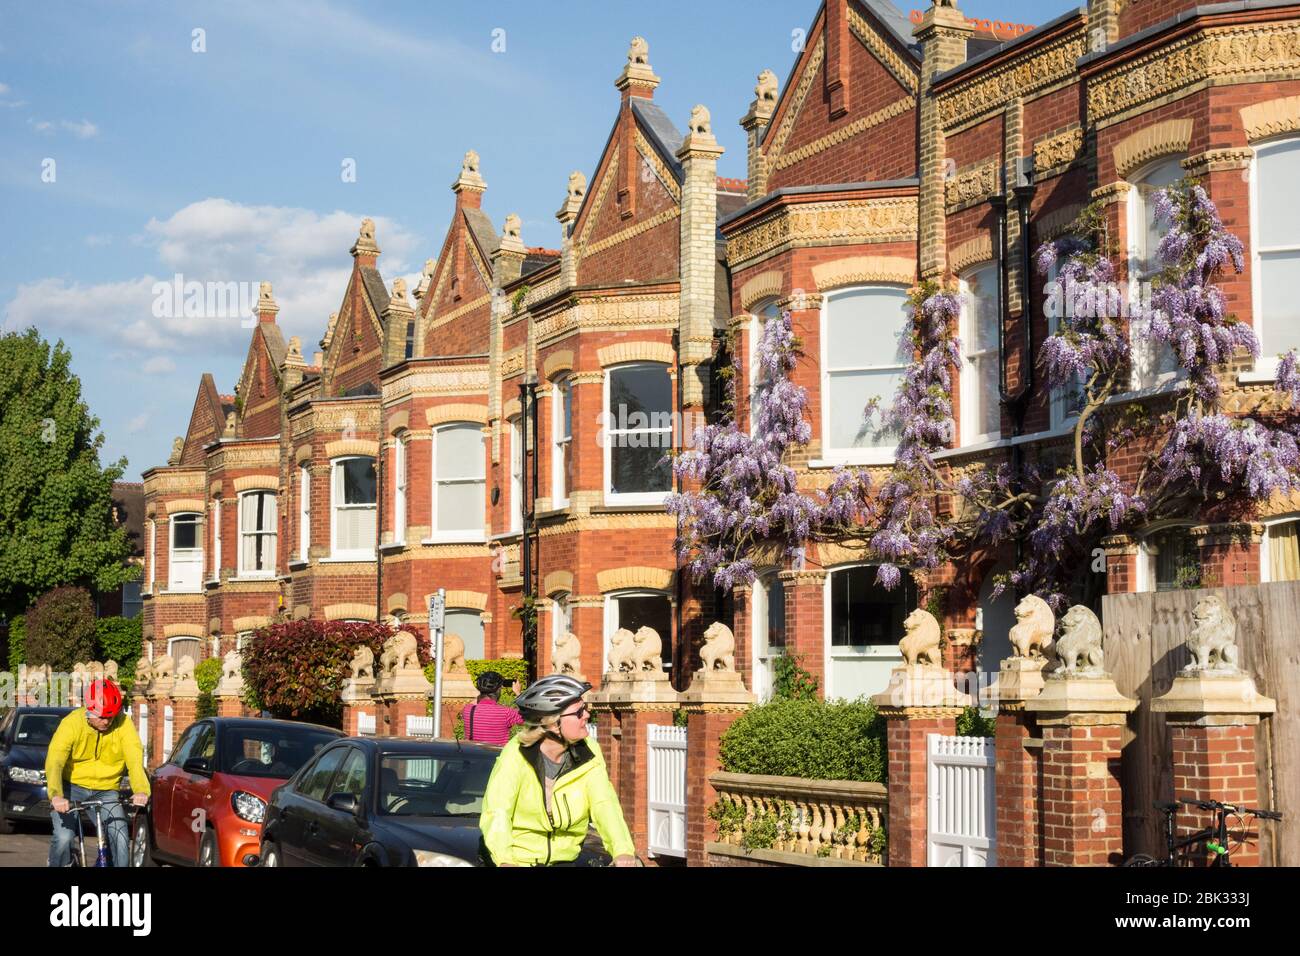 Lion statues on the gables and gateposts of Wisteria clad Lion Houses in Barnes, London, SW13, UK Stock Photo